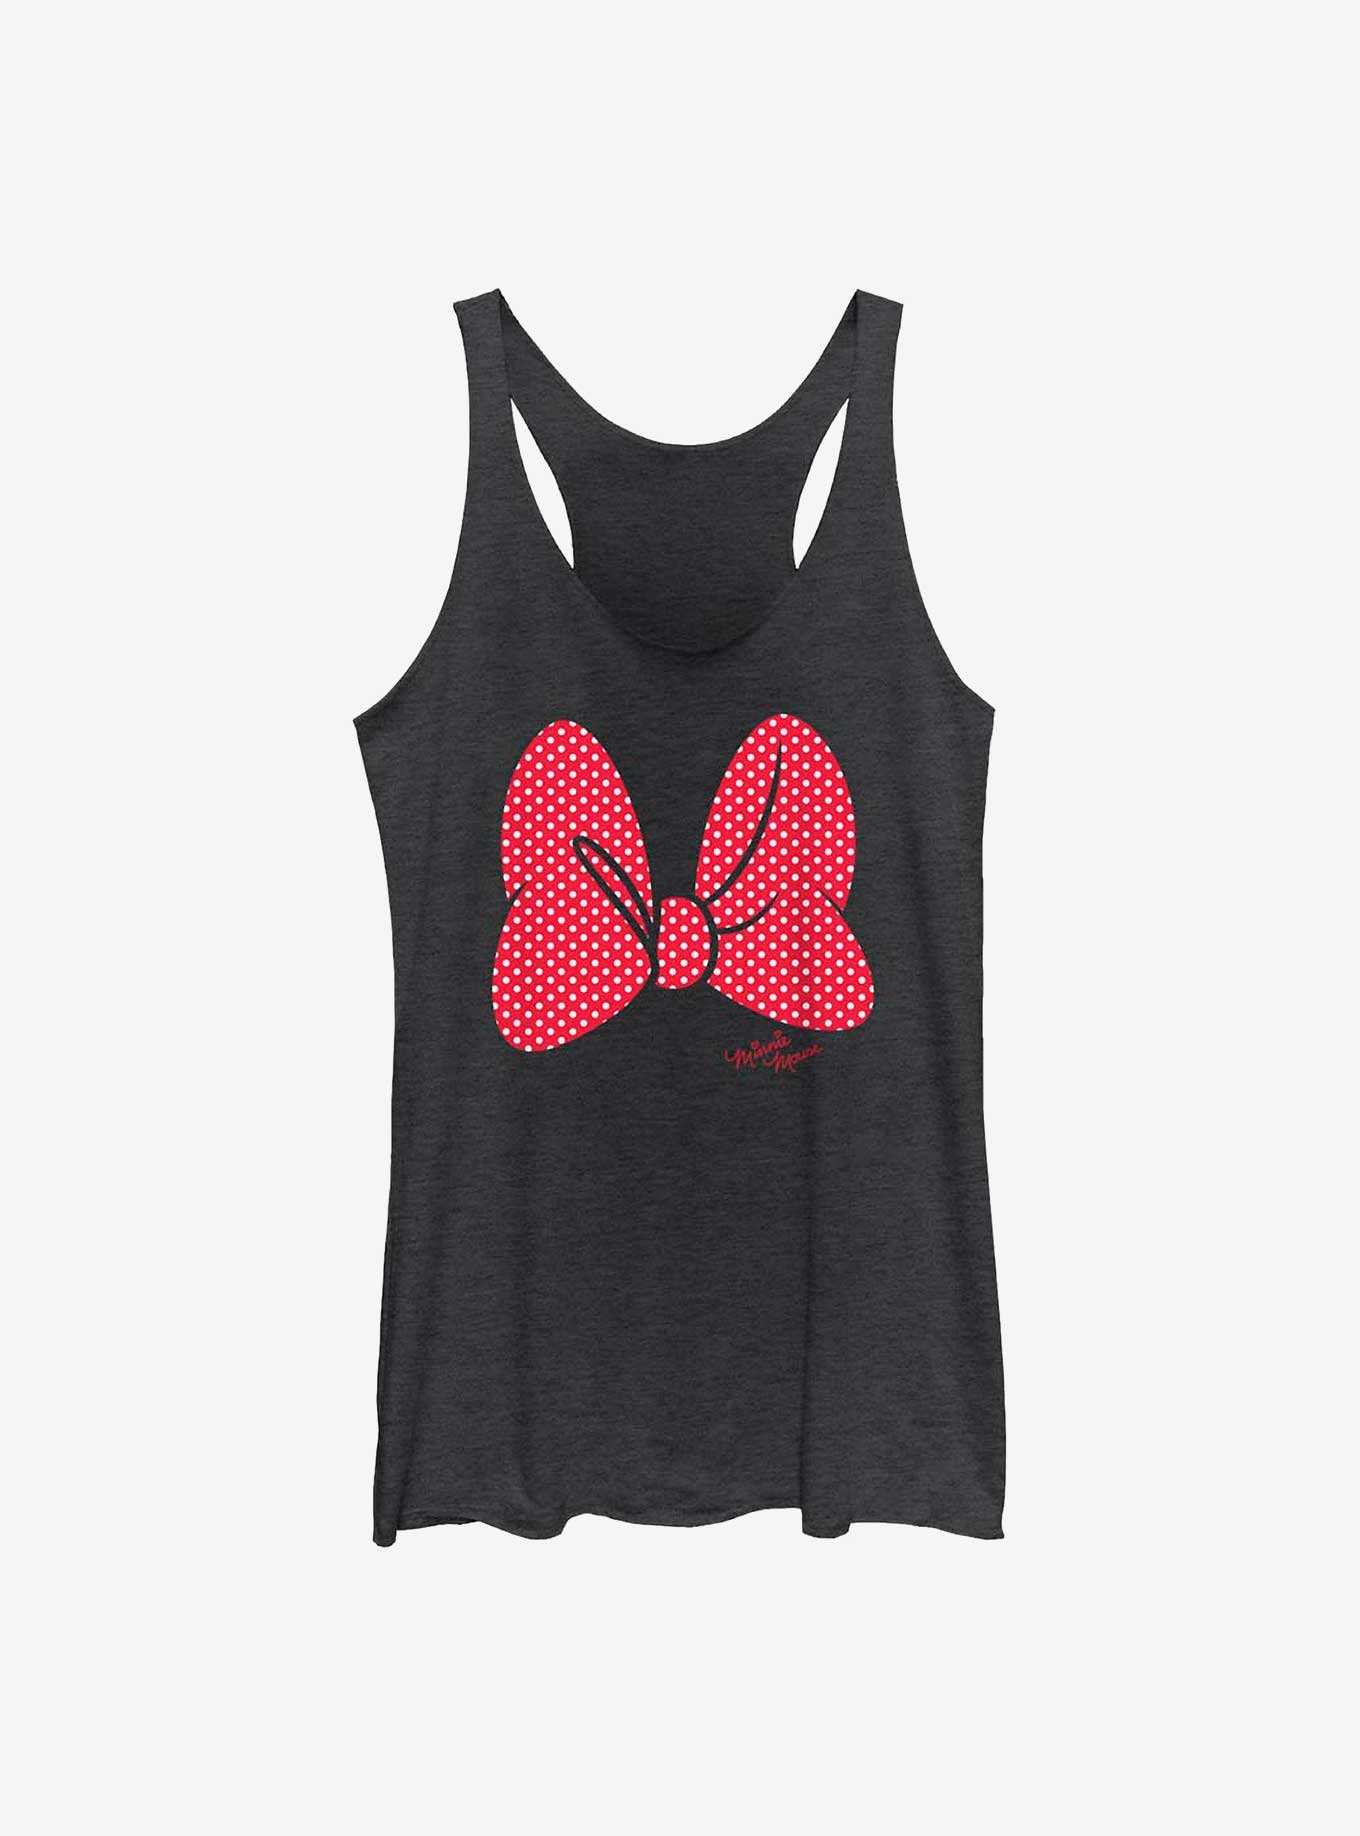 OFFICIAL Minnie Mouse Tank Tops